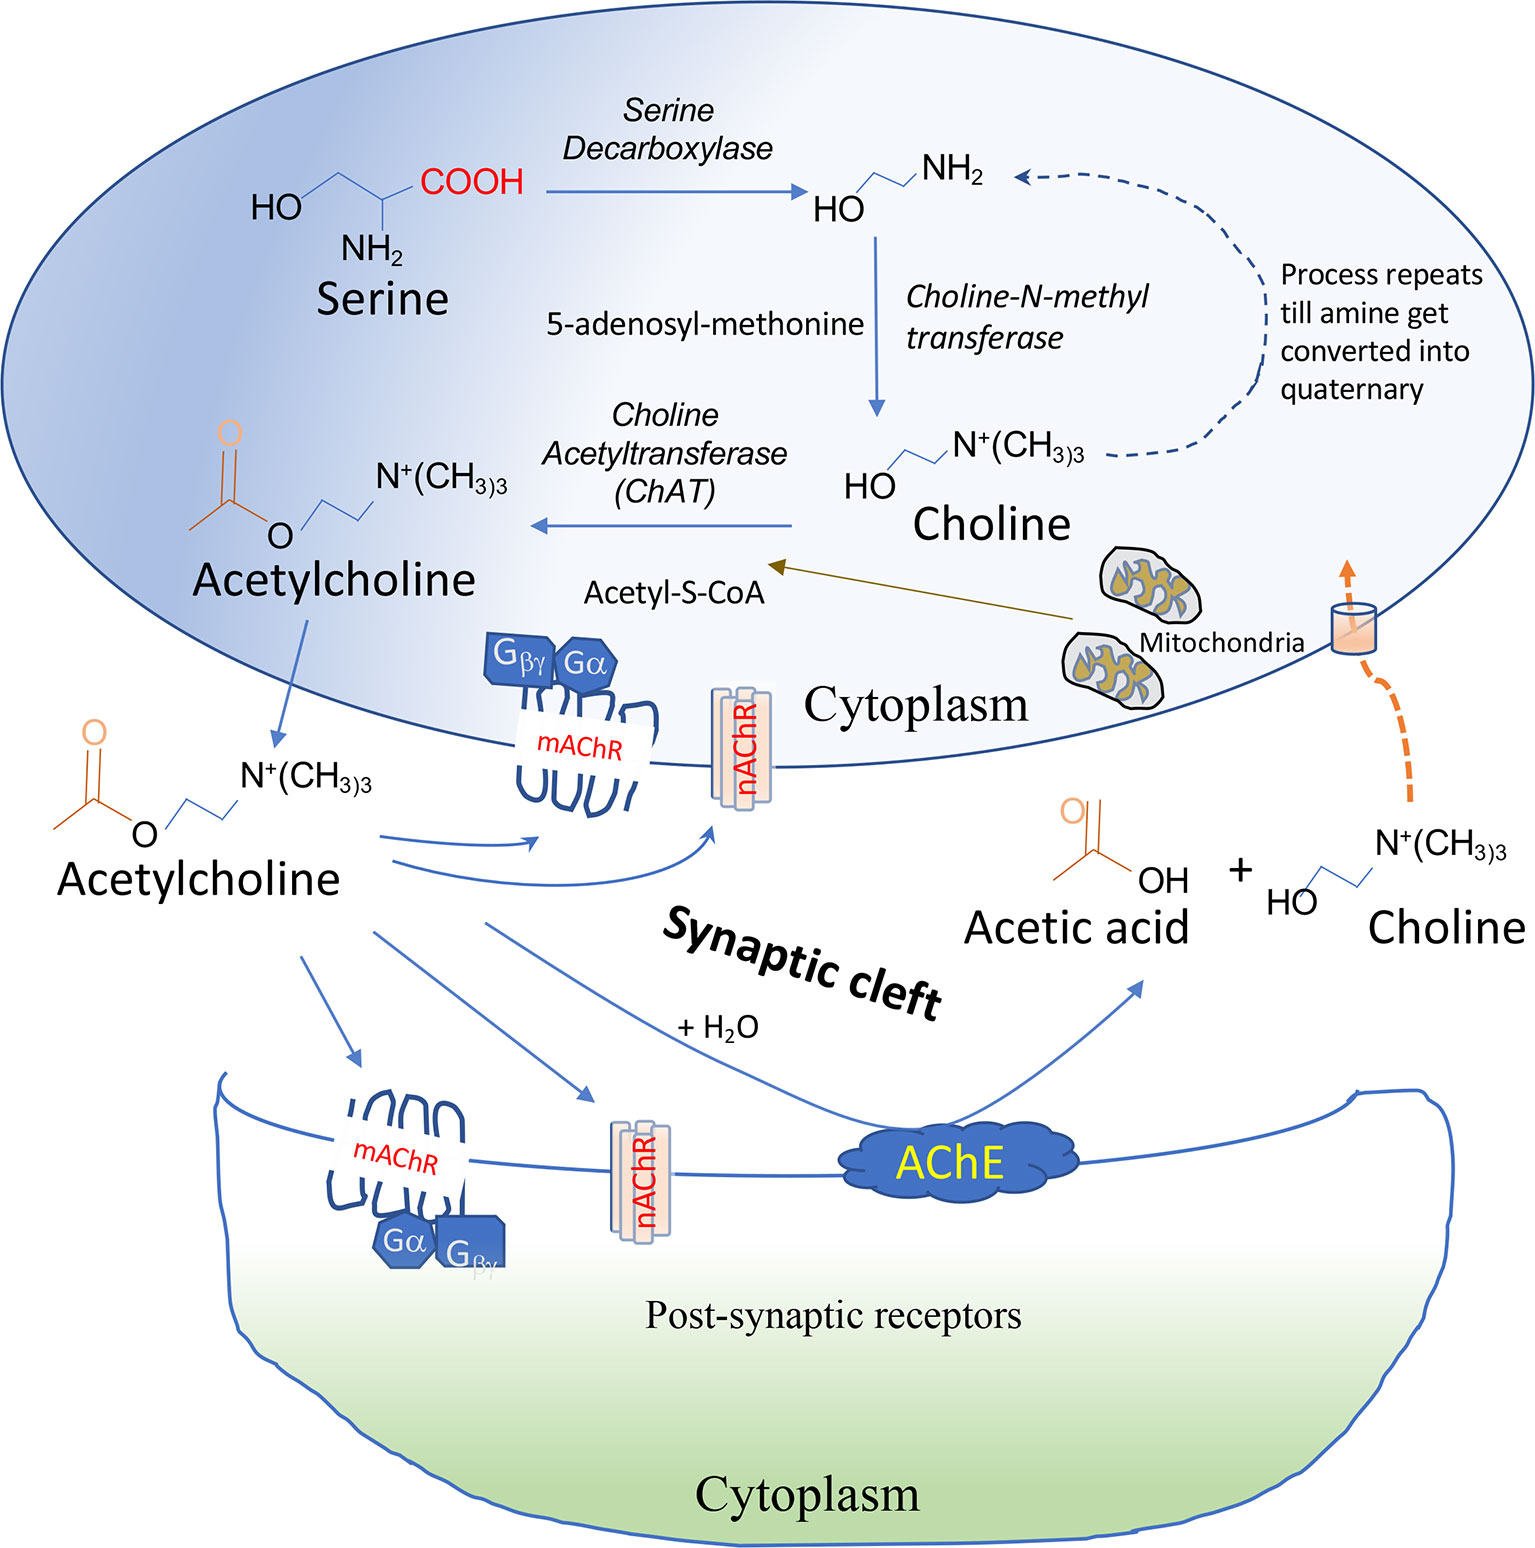 acetylcholine synthesis pathway